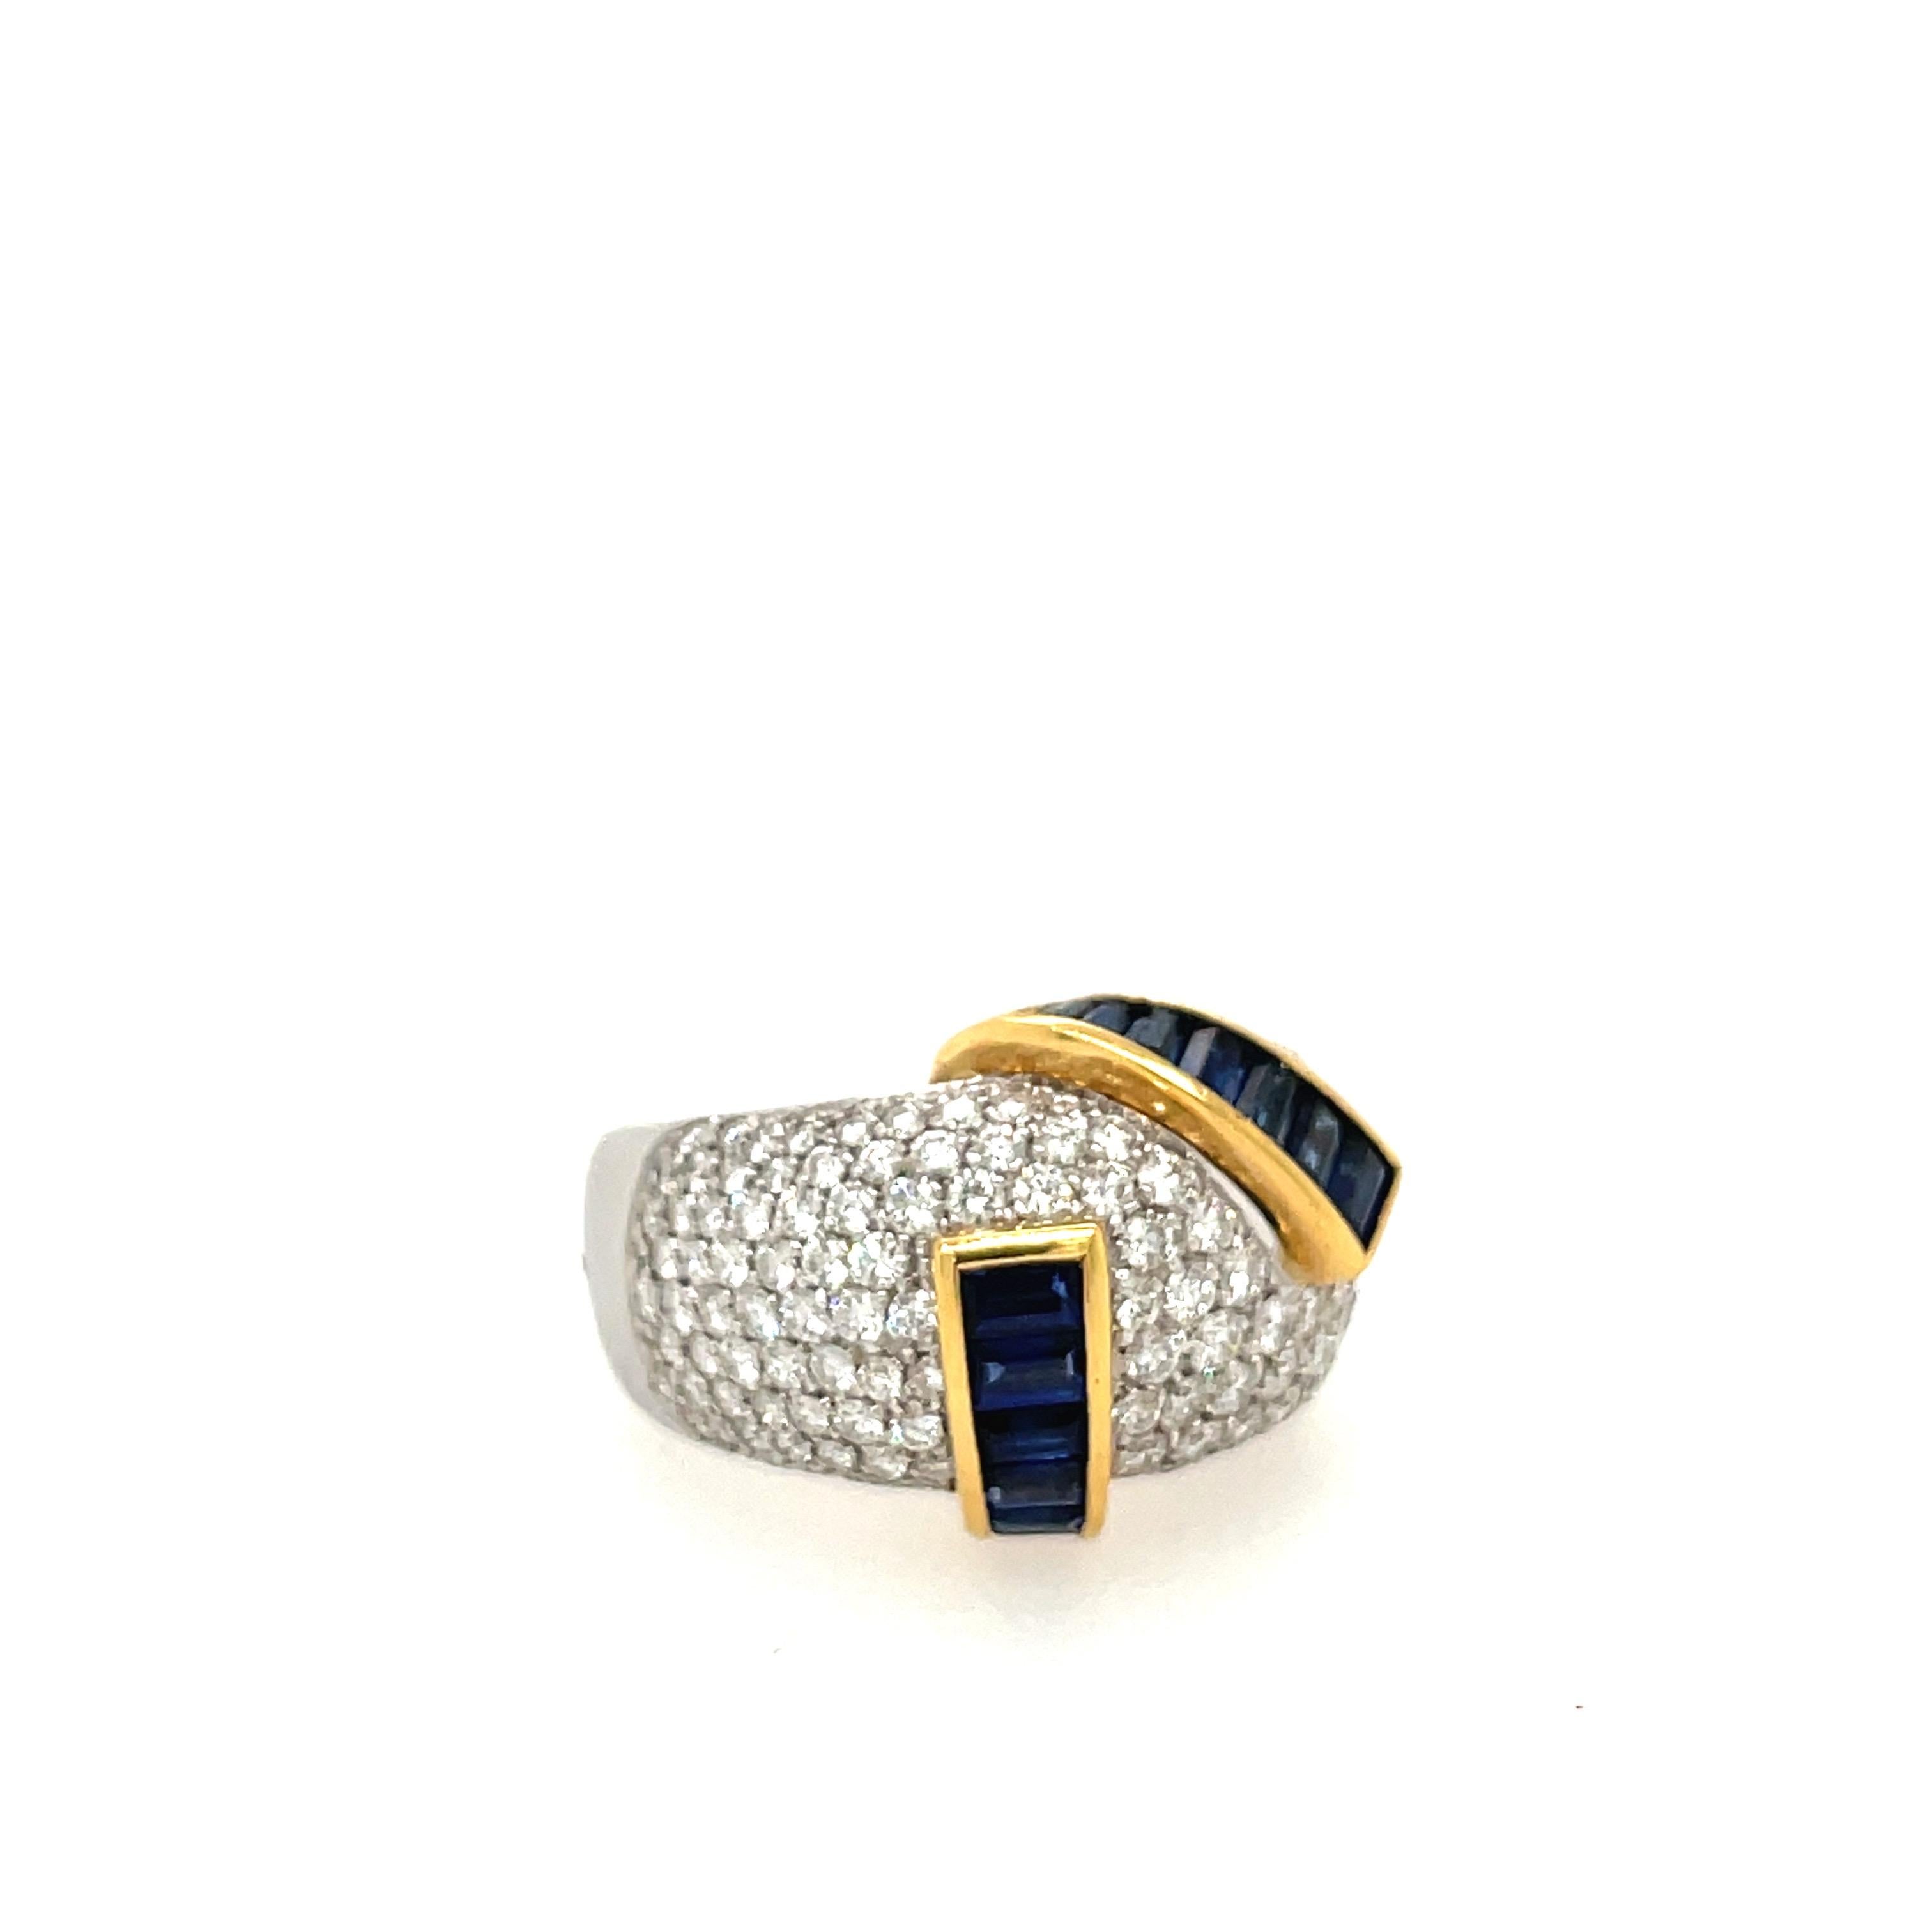 Alfiere & St. John 18KT Gold, Diamond 1.99 Carat and Blue Sapphire 2.15Ct. Ring For Sale 4